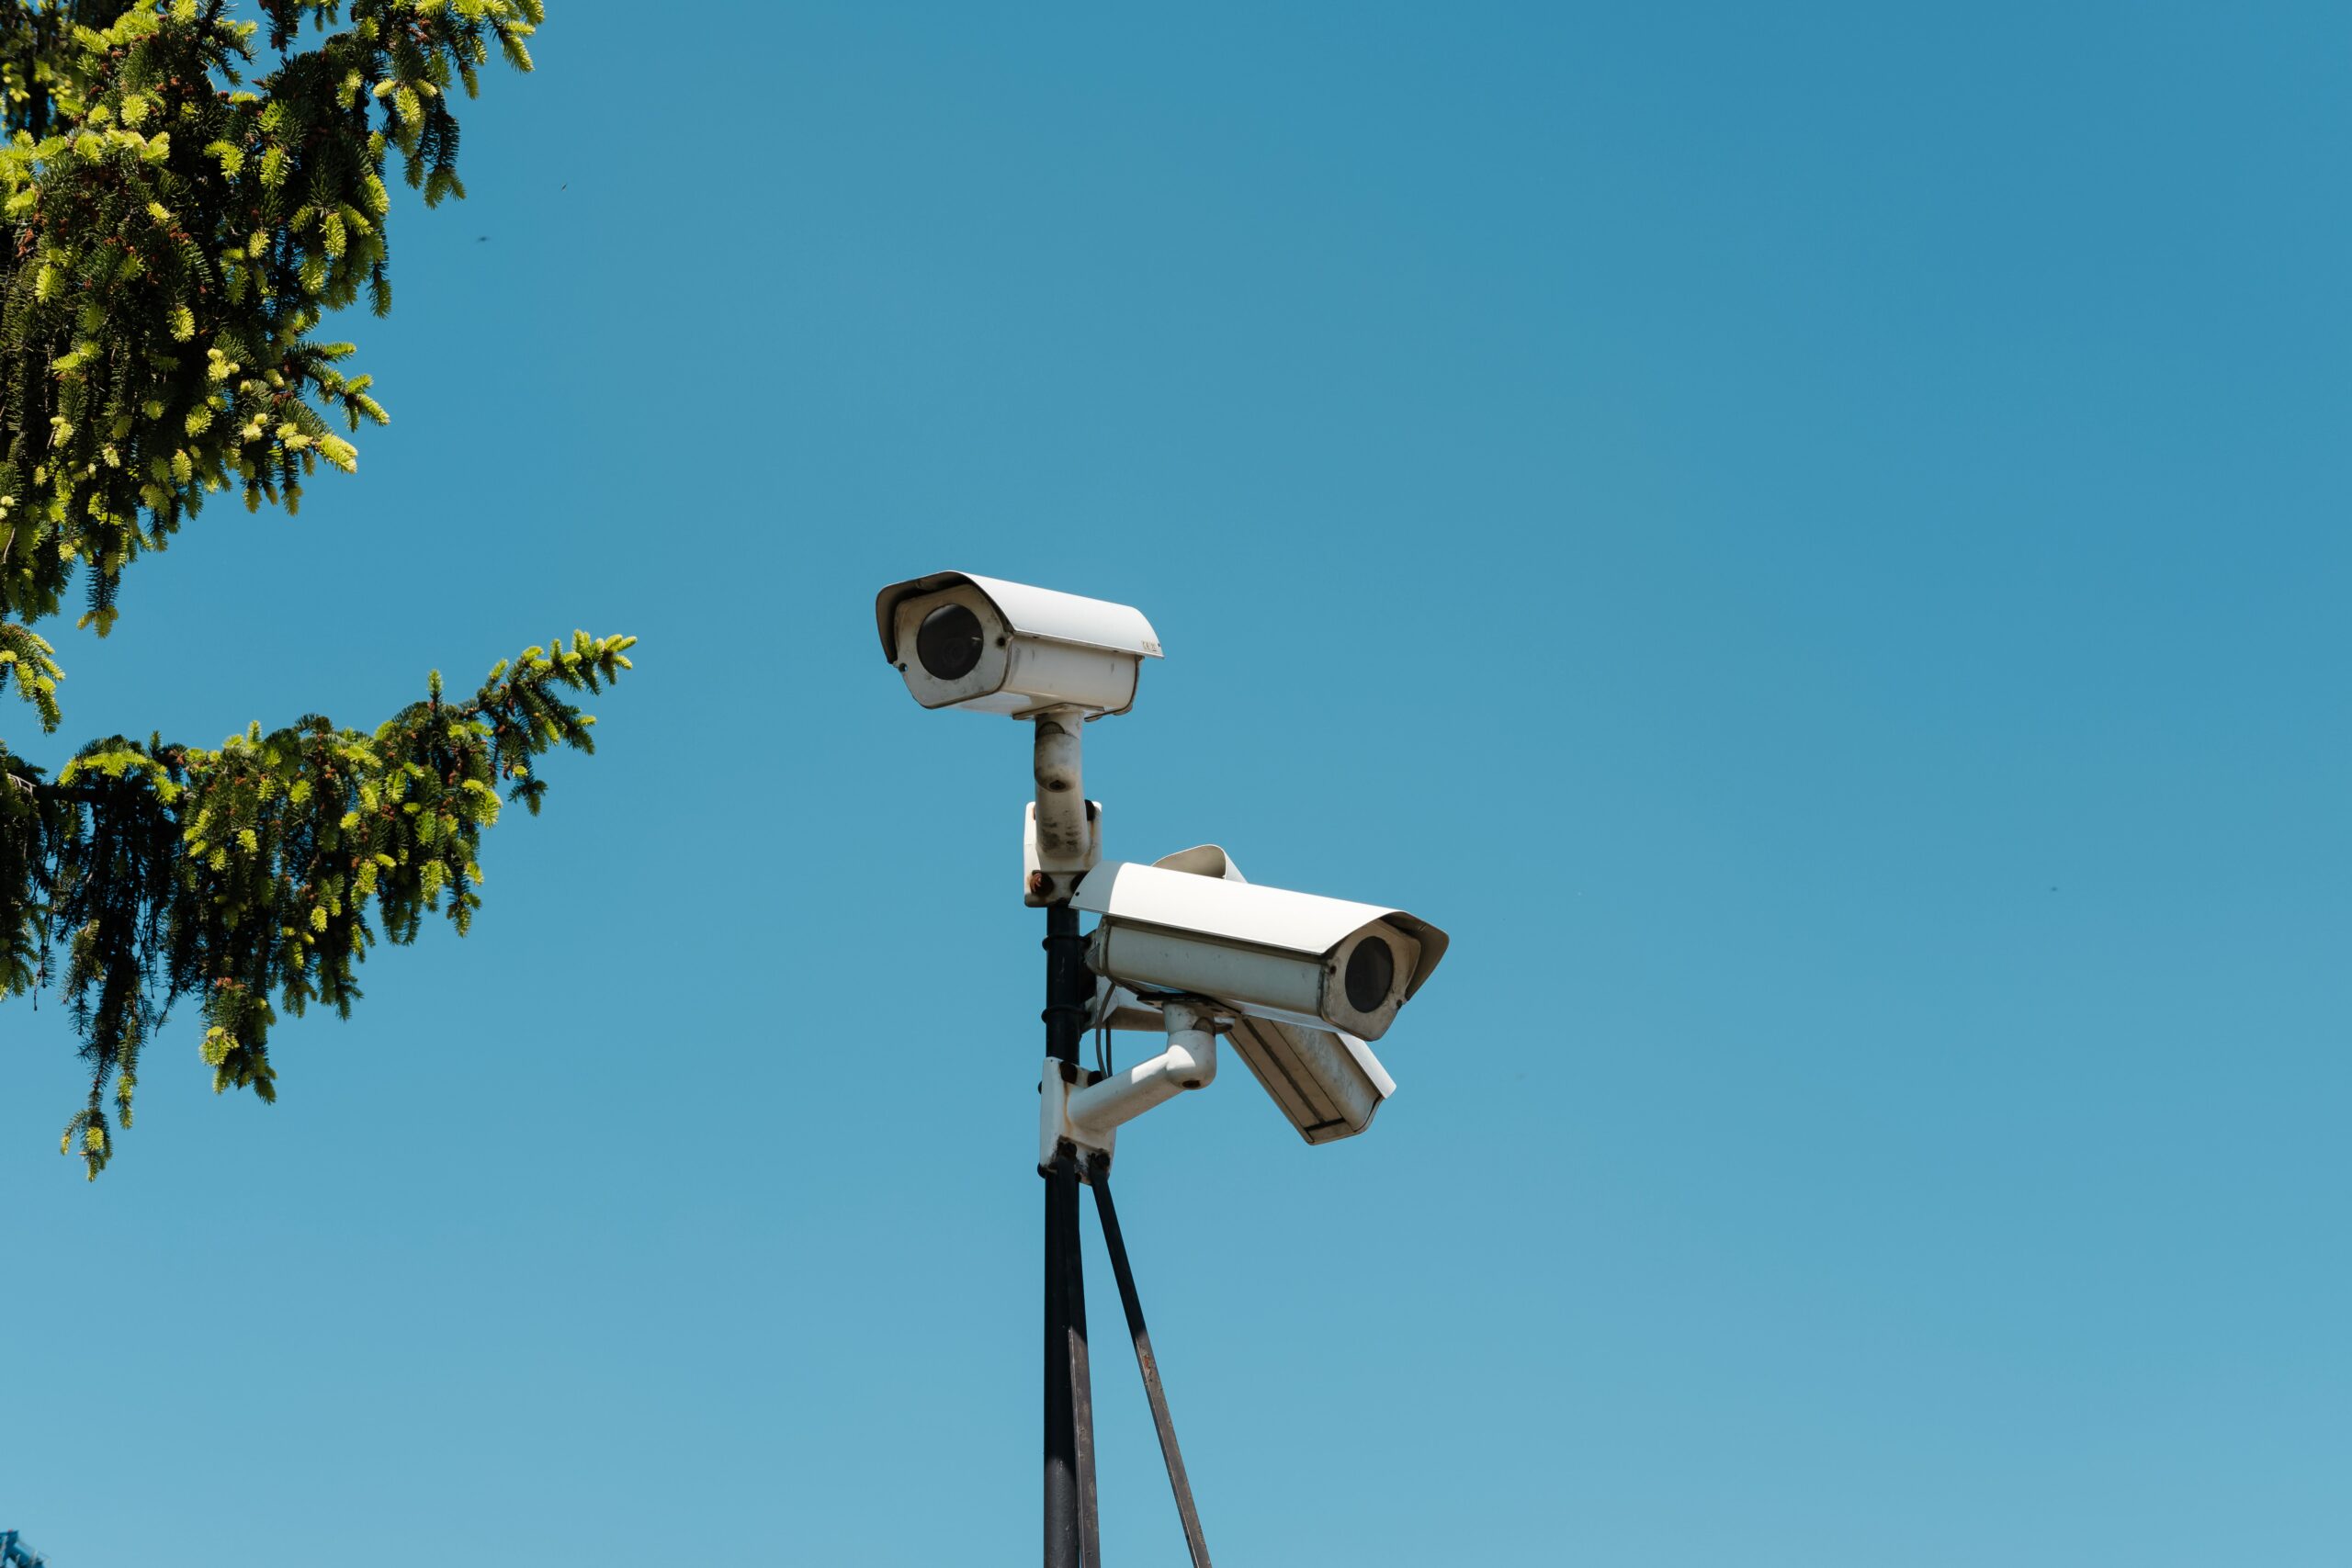 Two CCTV cameras are seen on a pole. Their background is a bright blue sky.